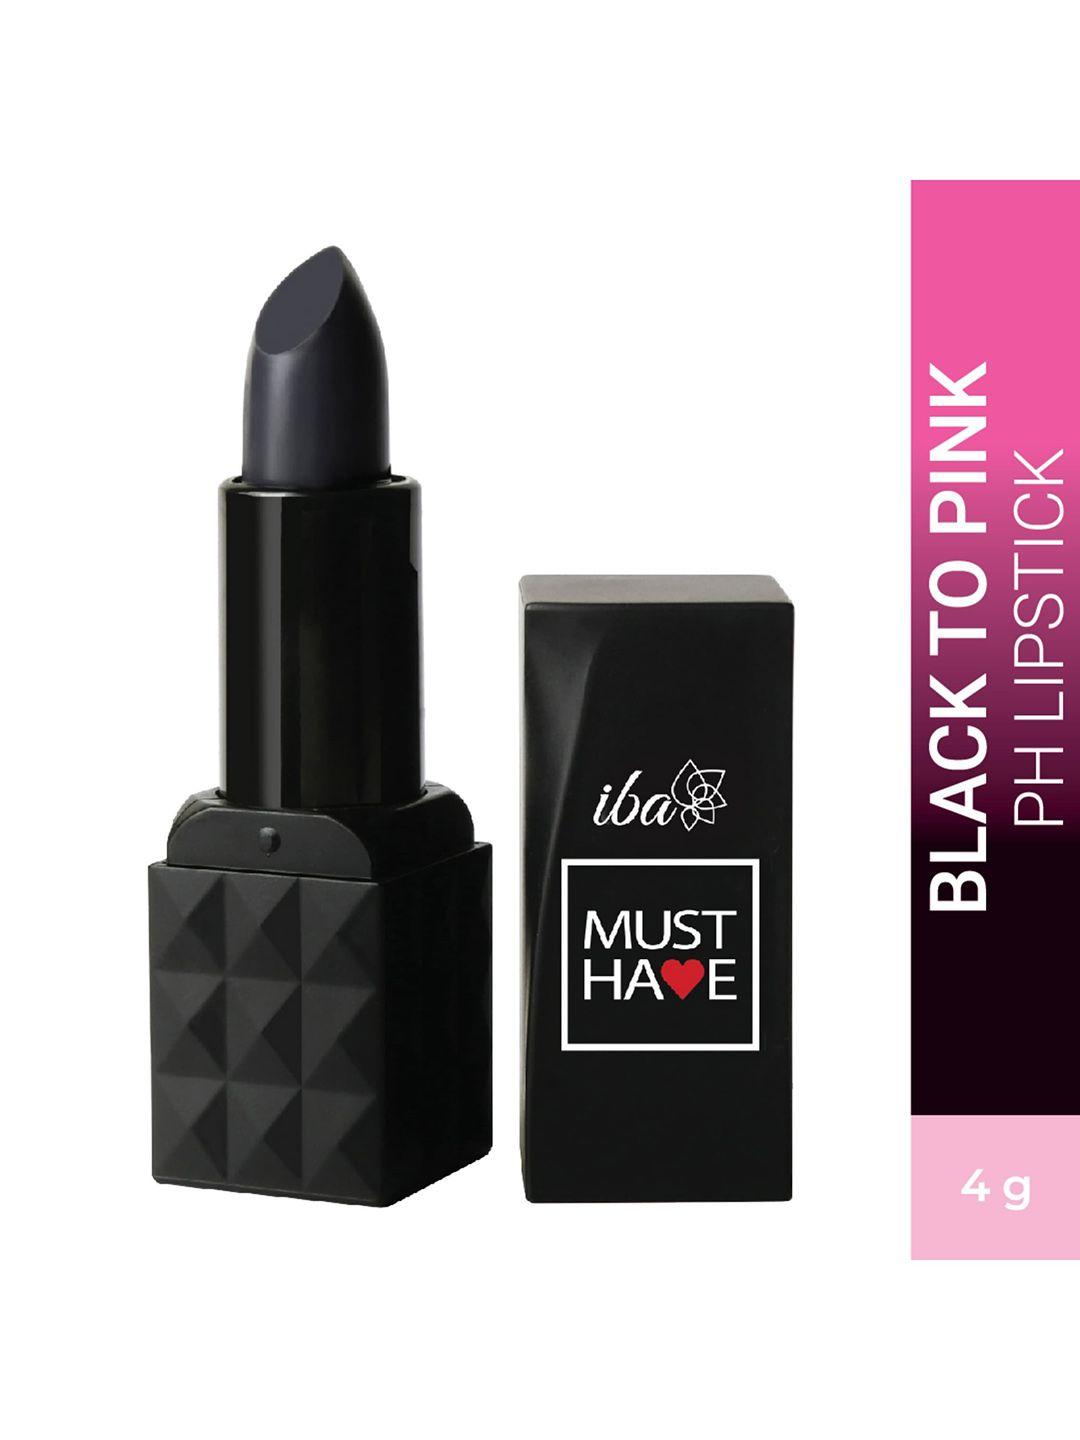 iba-must-have-colour-change-ph-bullet-lipstick-4g---black-to-pink